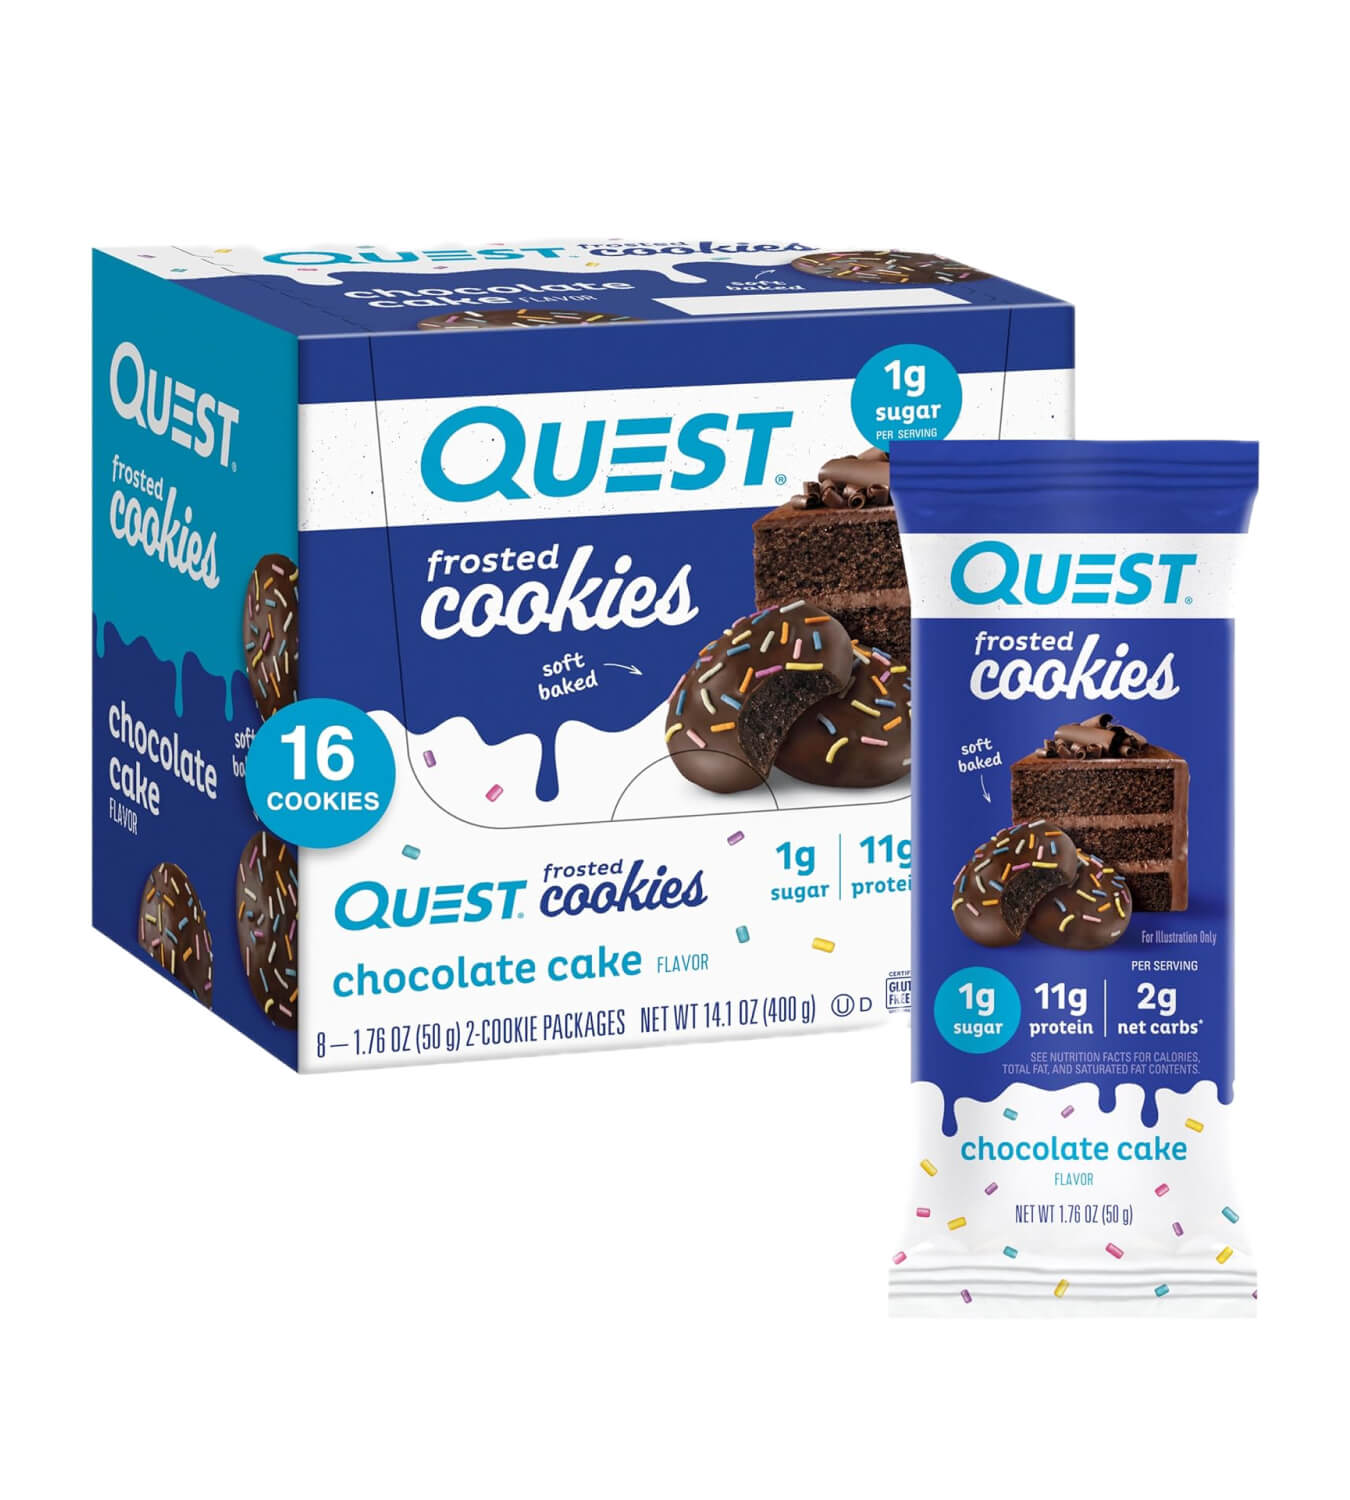 Quest Chocolate Cake Frosted Cookies